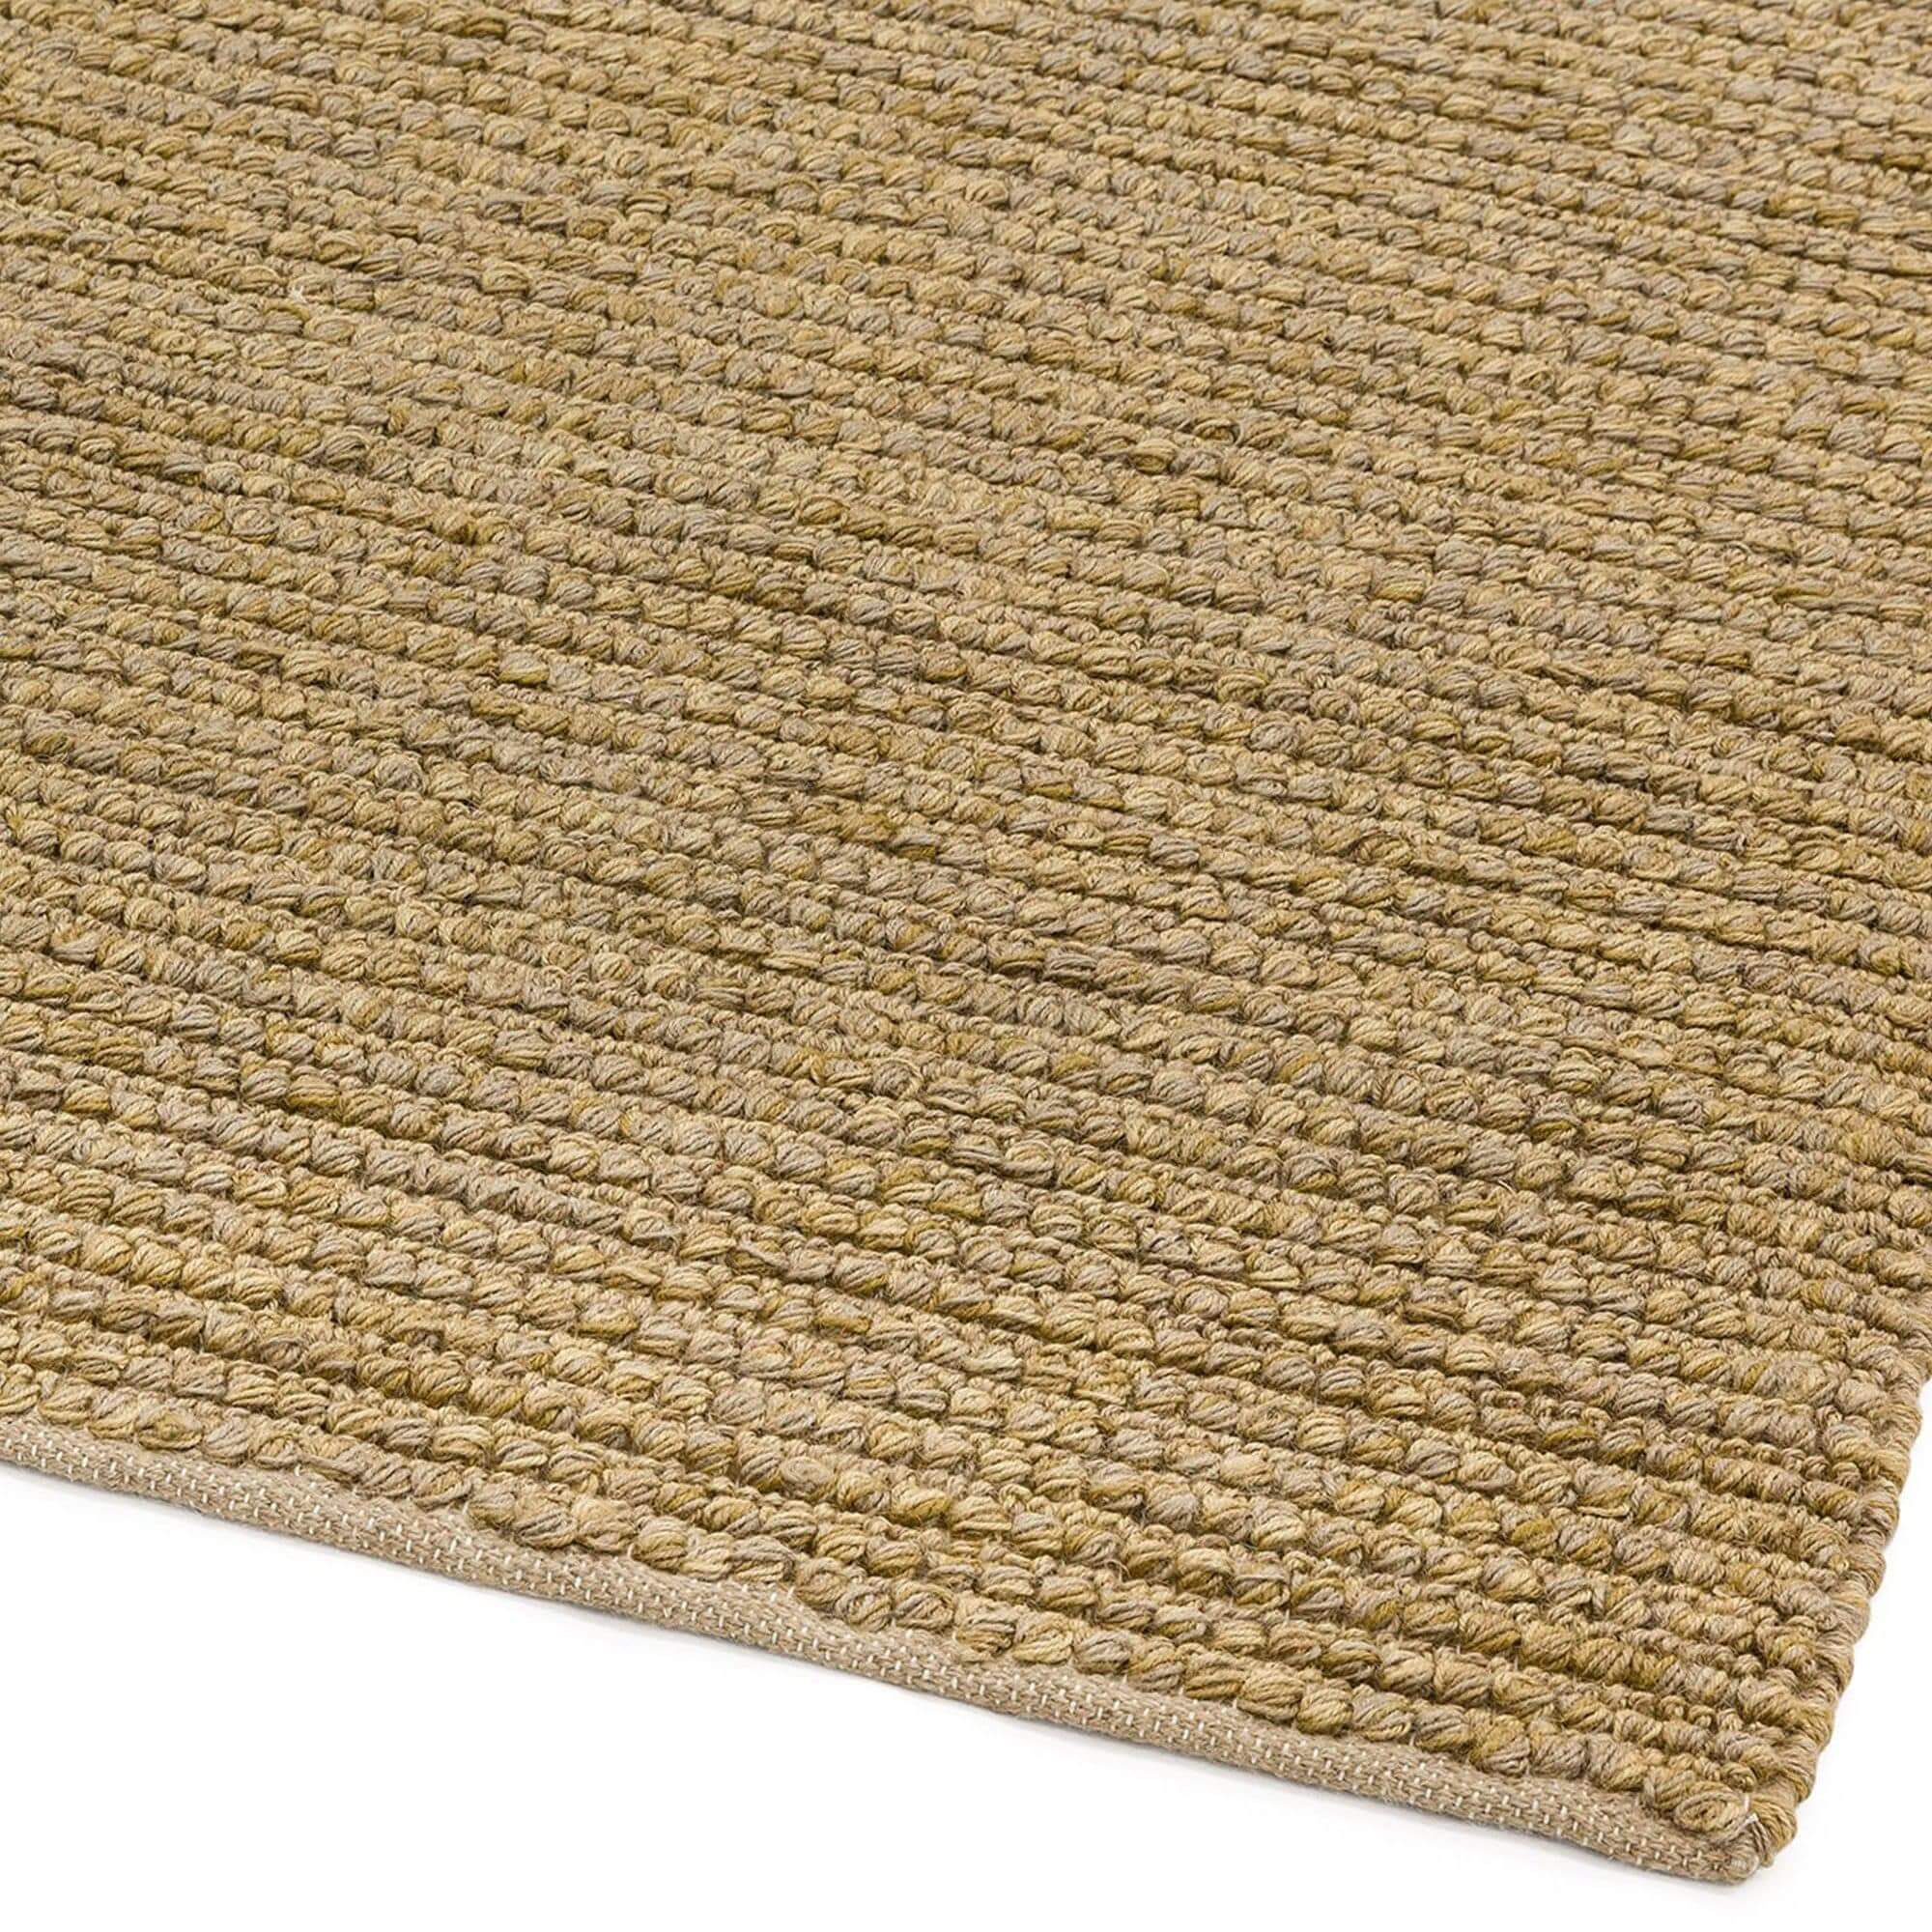 Chunky Braided Loop Jute Rug - Natural - escapologyhome.co.uk